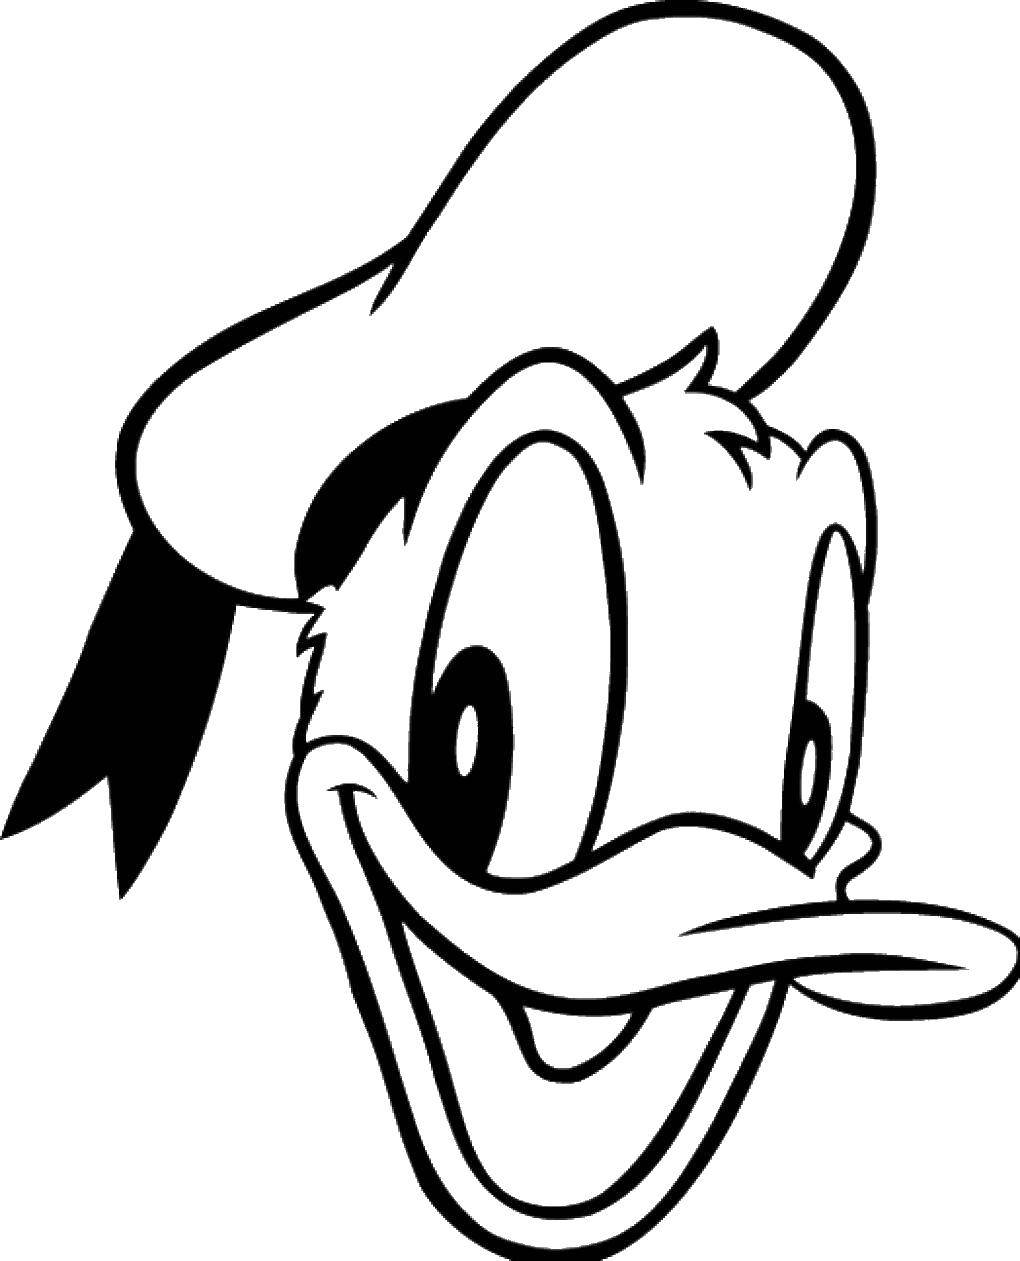 Coloring The face of Donald duck. Category Disney cartoons. Tags:  cartoons, Donald duck, Disney.